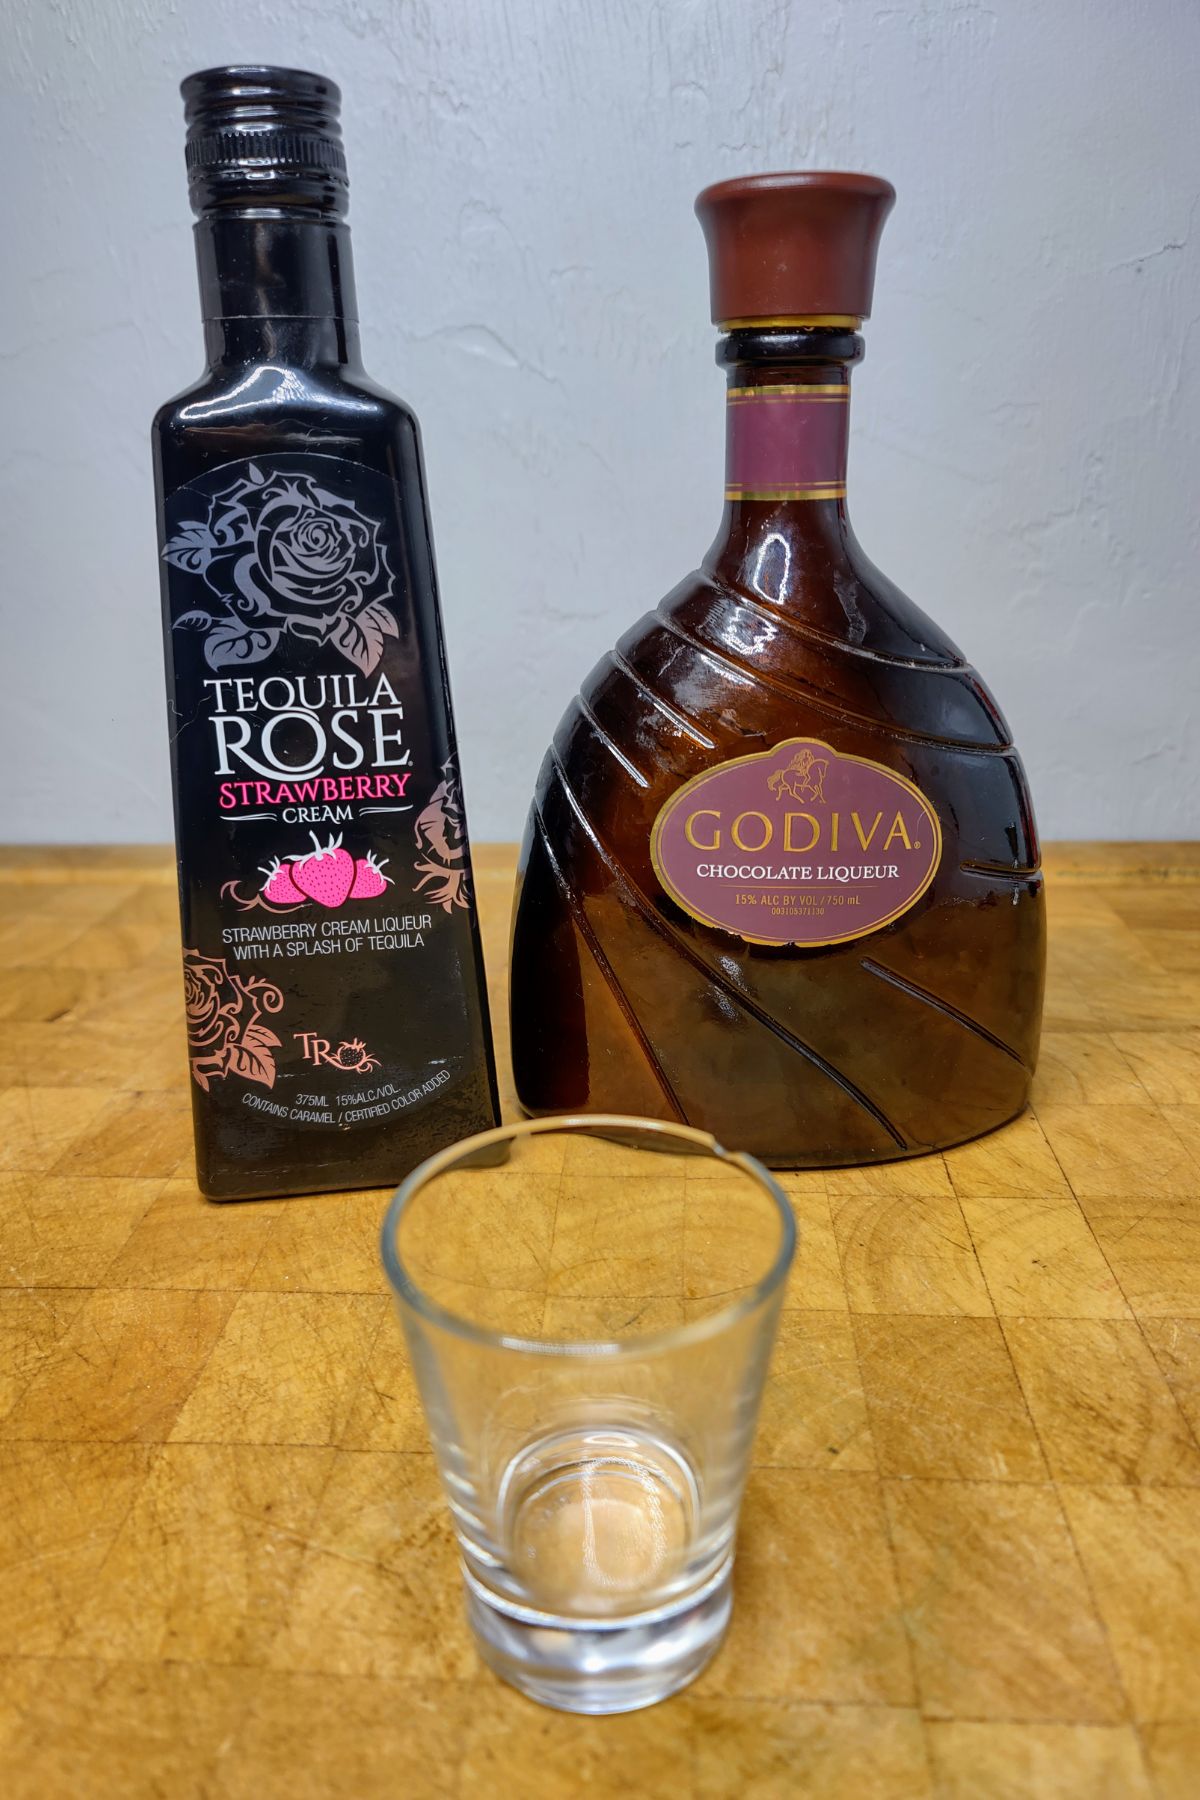 Bottle of tequila rose and godiva behind a shot glass.